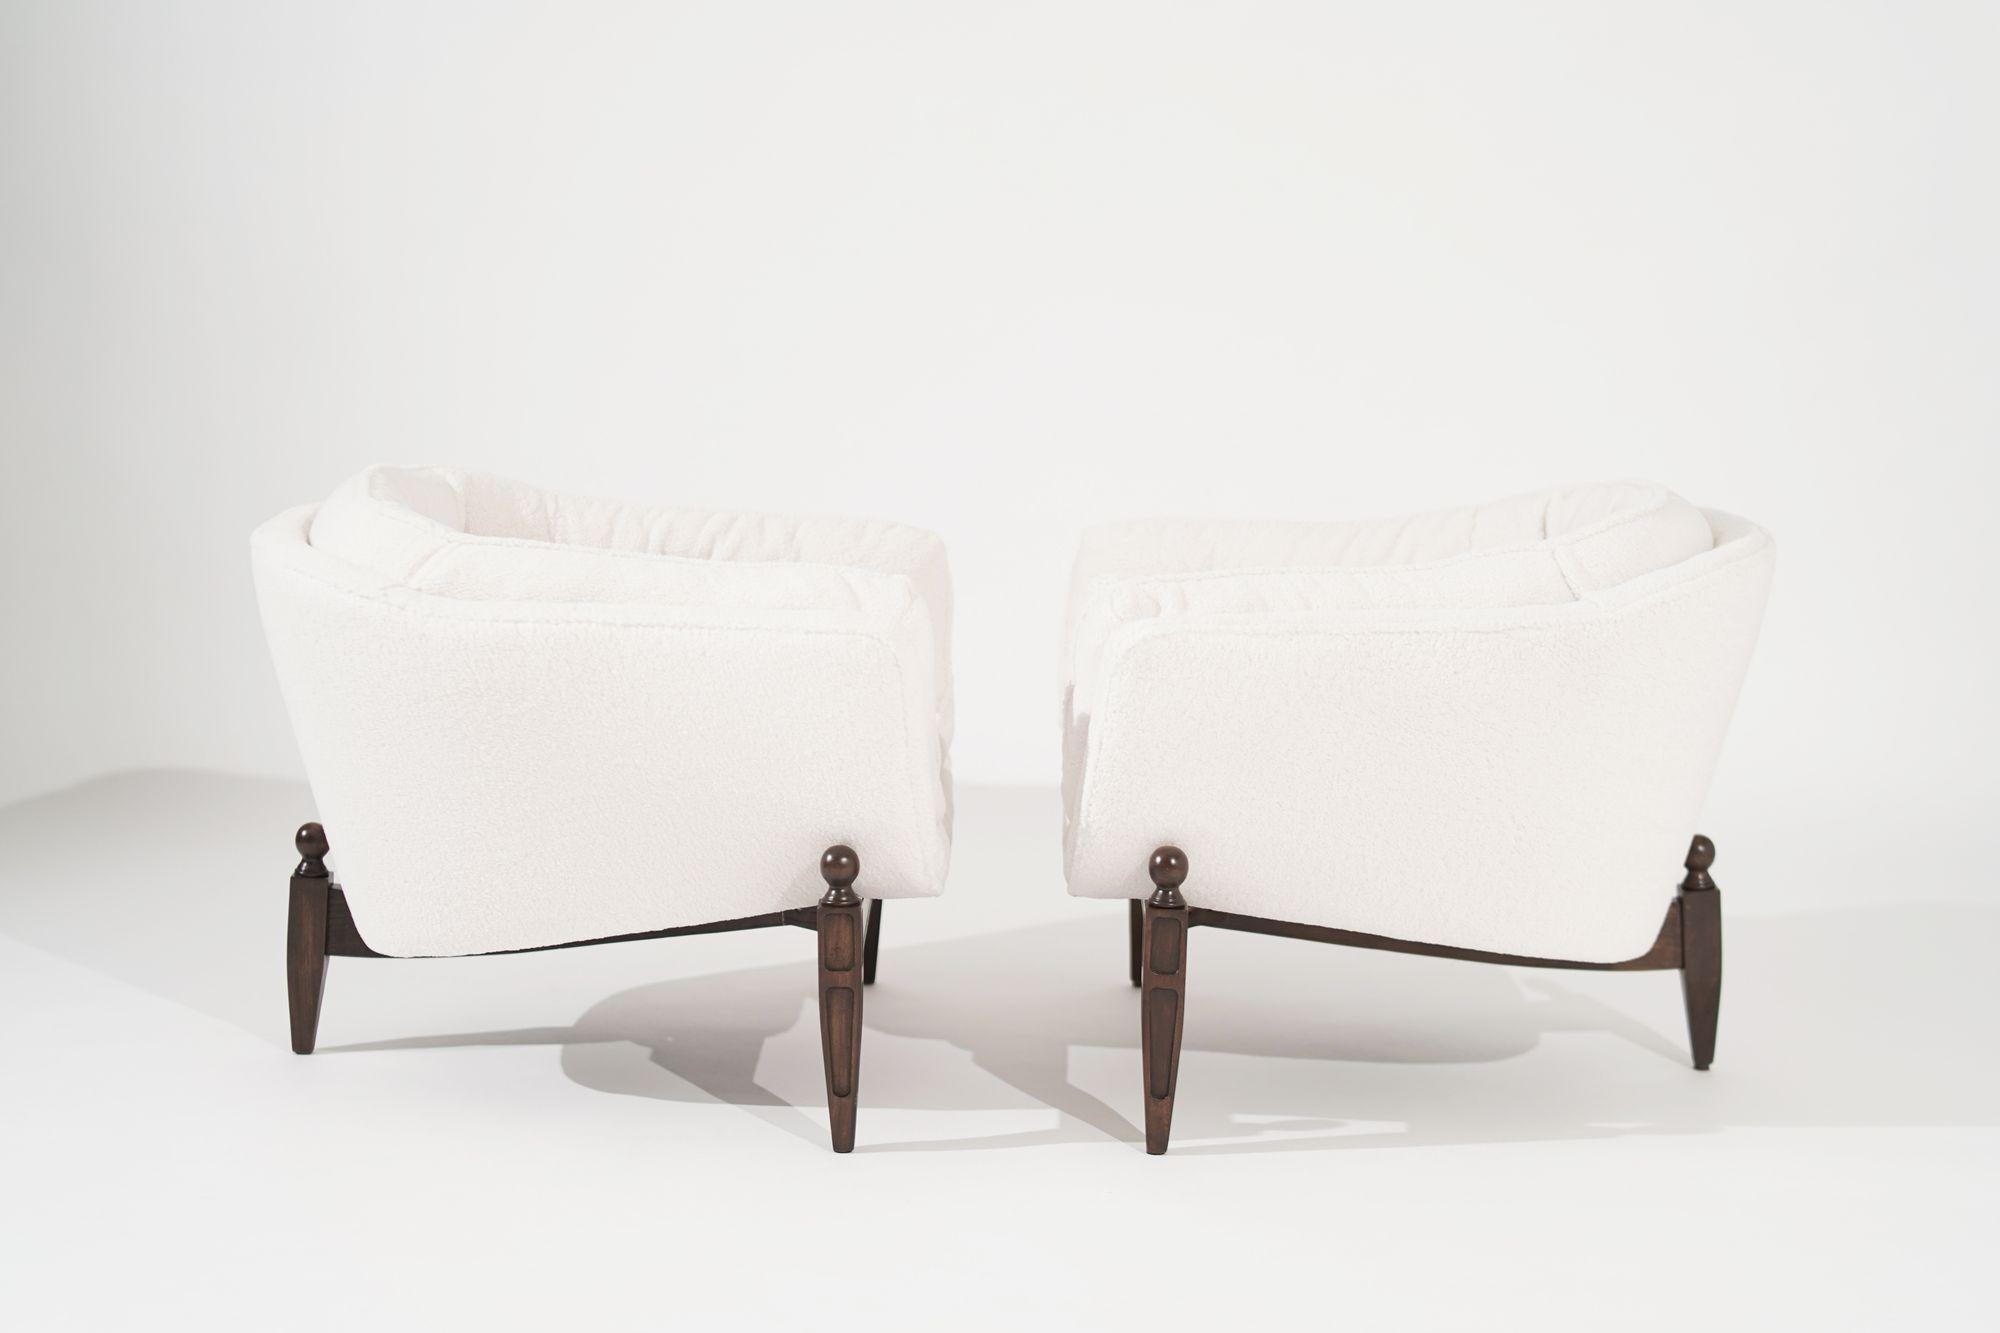 Set of Transitional Tripod Lounge Chairs in Wool, circa 1950s For Sale 1